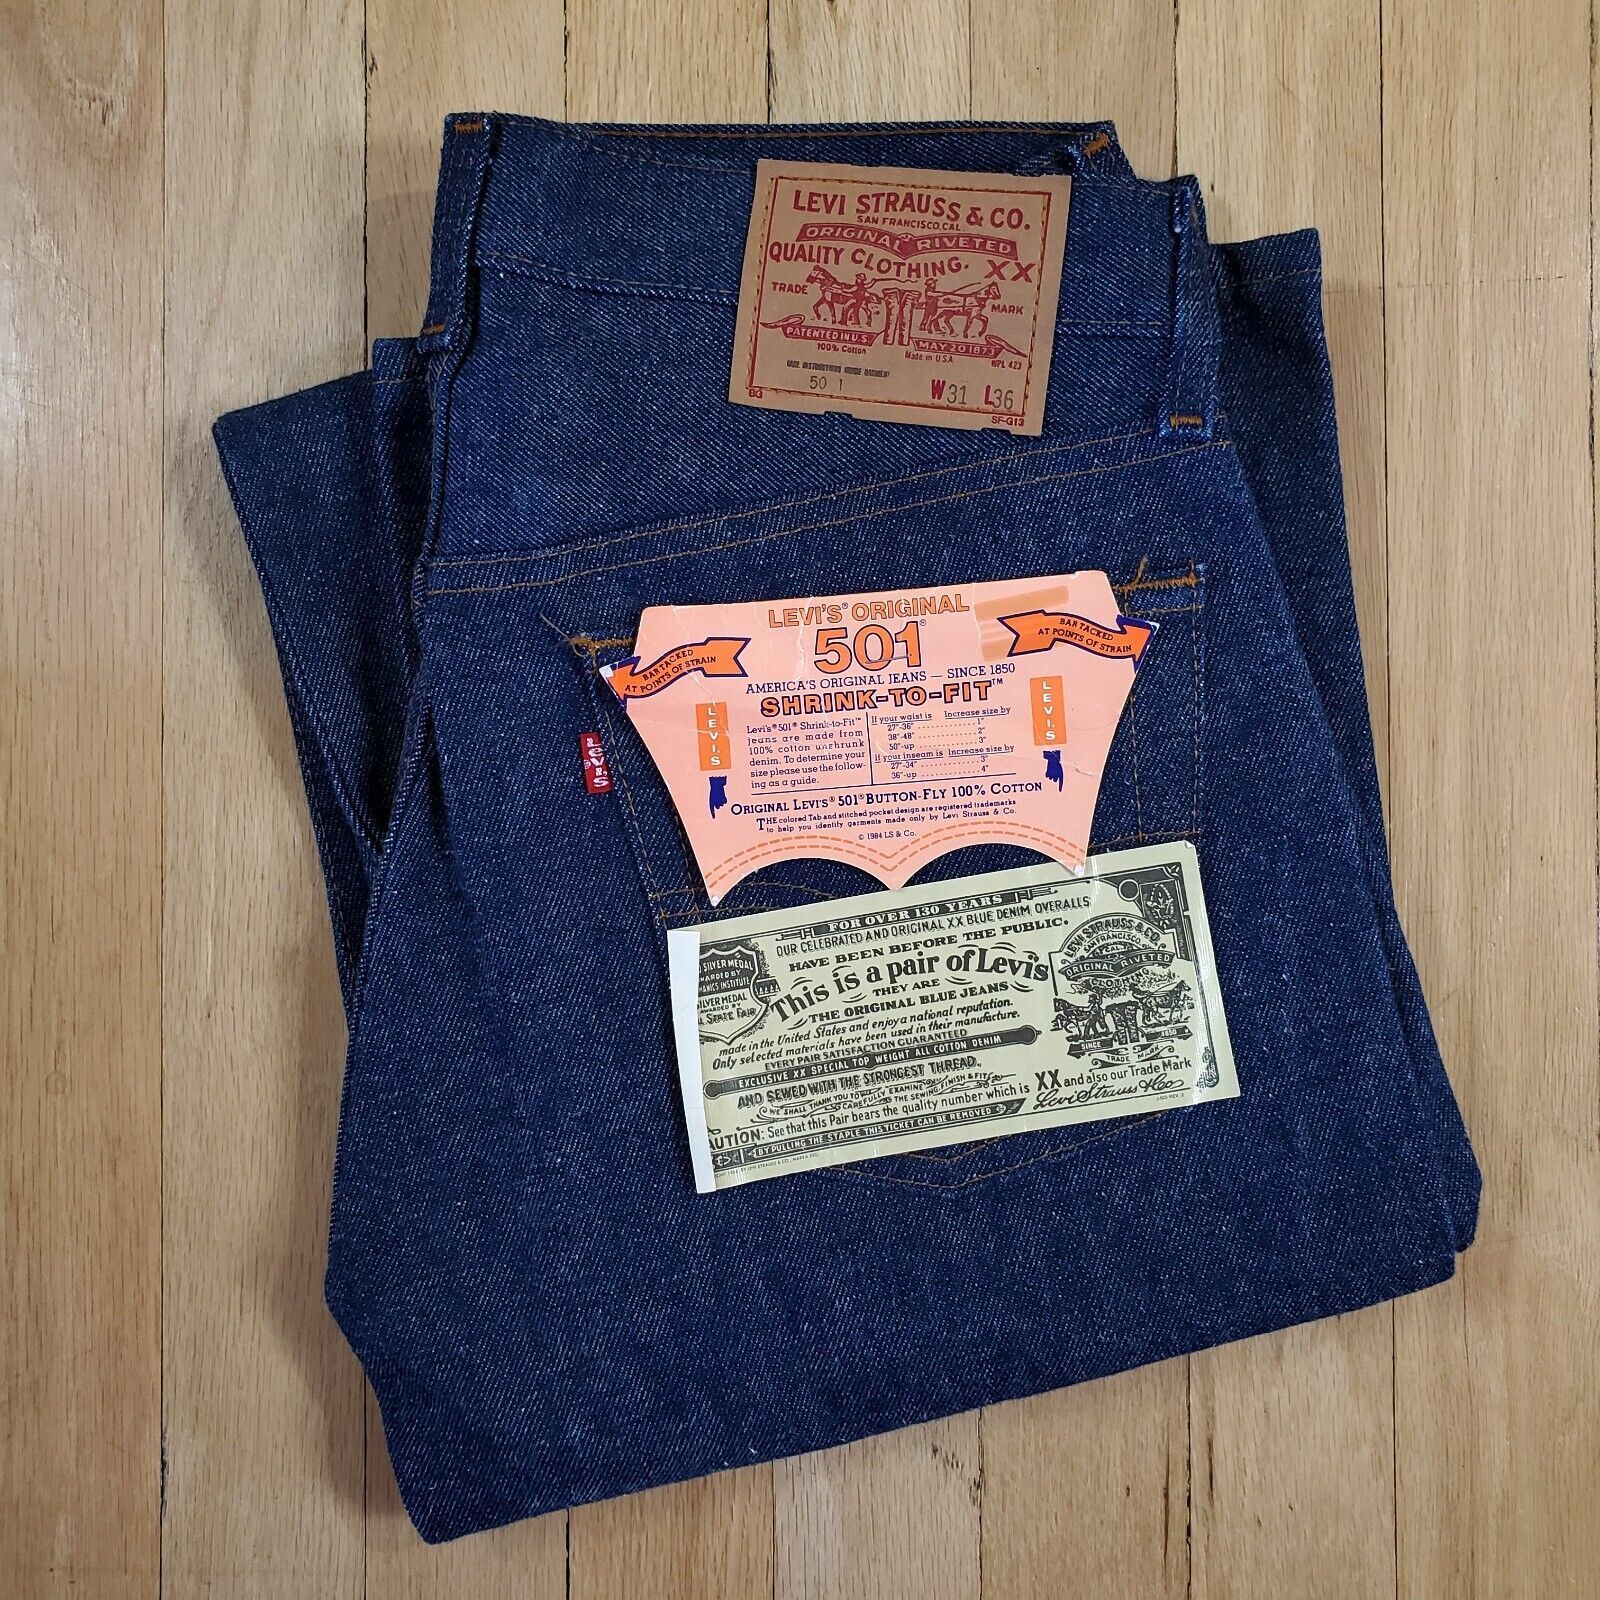 Levi's 501 Jeans Review - Our Expert's Guide to Buying 501s